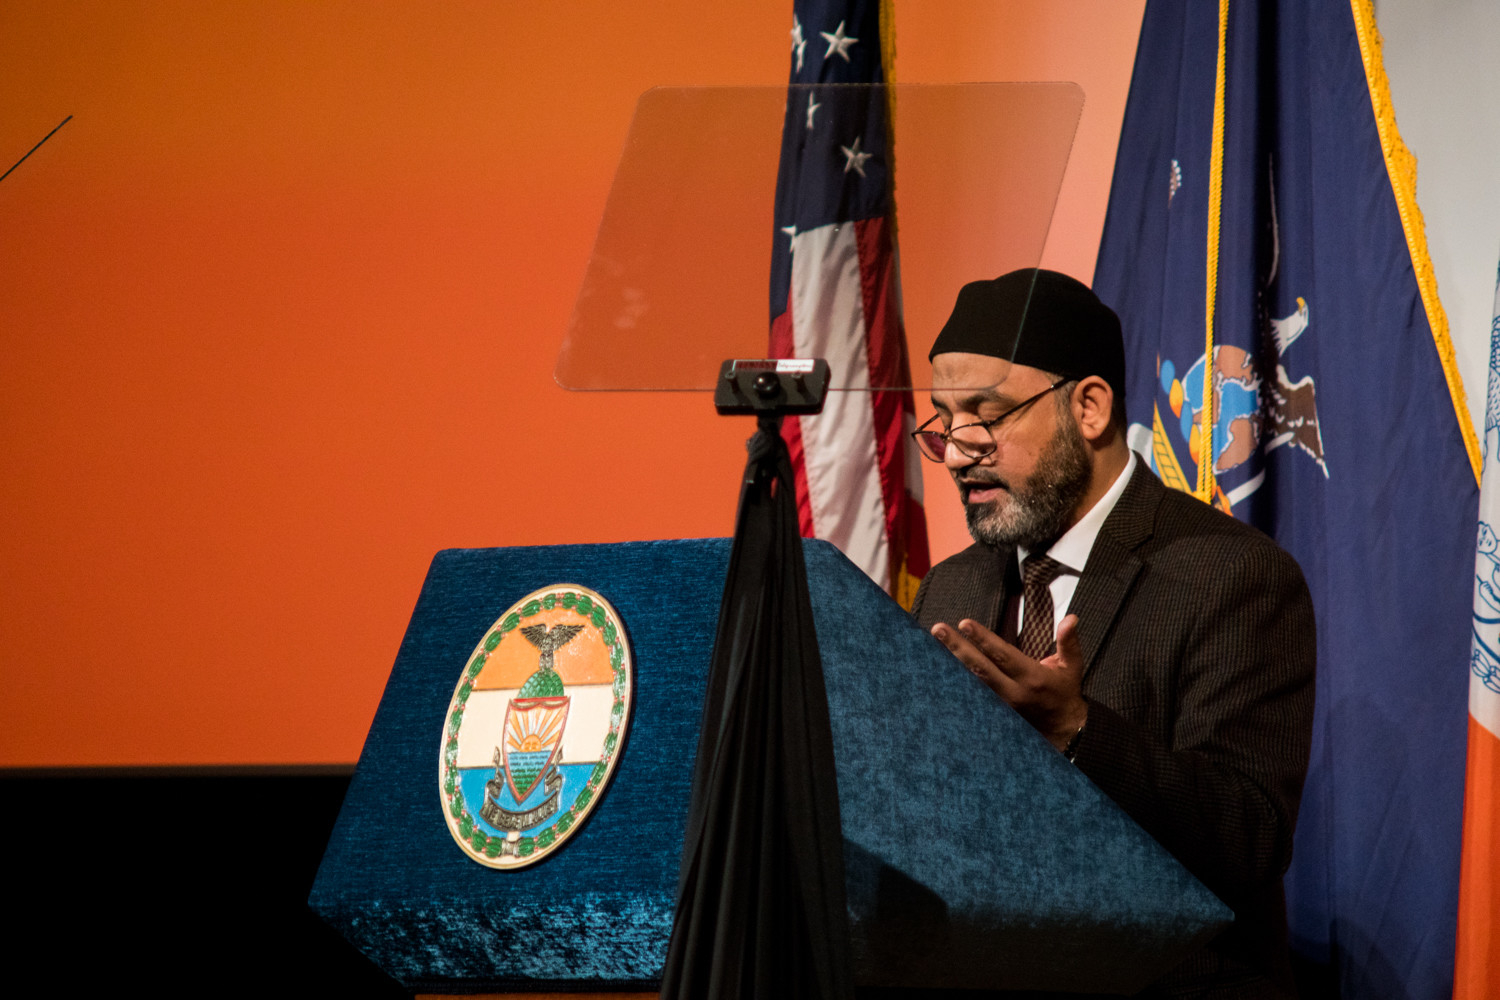 Ali Kamel, an imam at the Muslim American Society’s Upper New York subchapter, raises his hands in prayer as he gives the invocation before Ruben Diaz Jr.’s state of the borough address at the Bronx High School of Science.